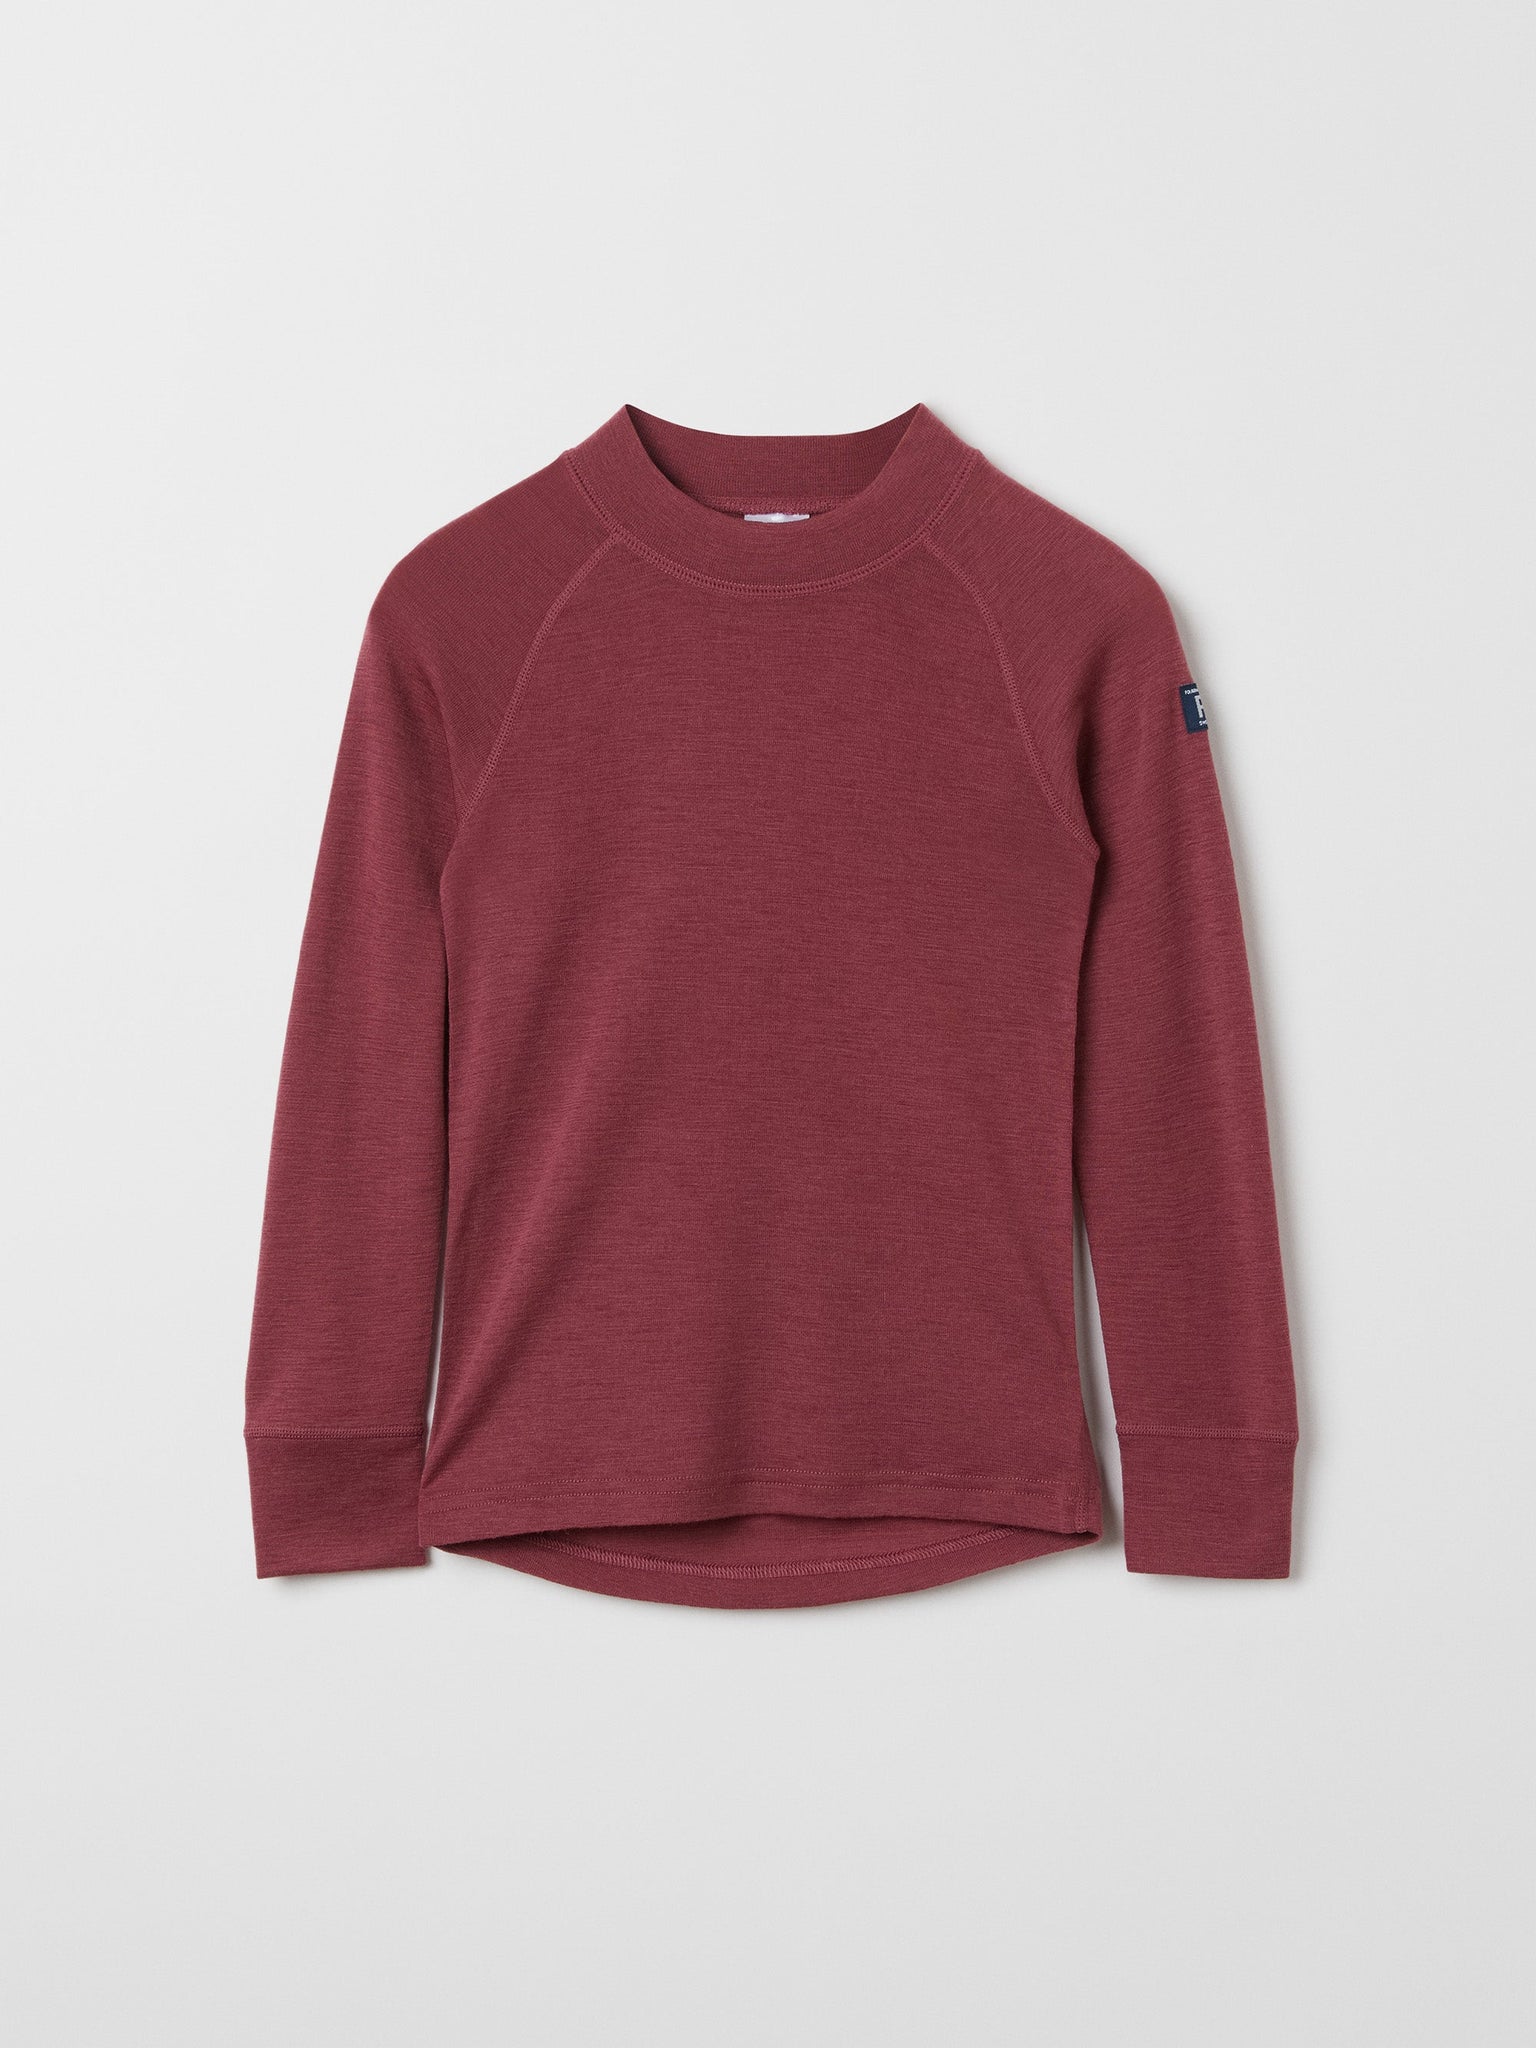 Red Merino Wool Kids Thermal Top from the Polarn O. Pyret outerwear collection. The best ethical kids outerwear.